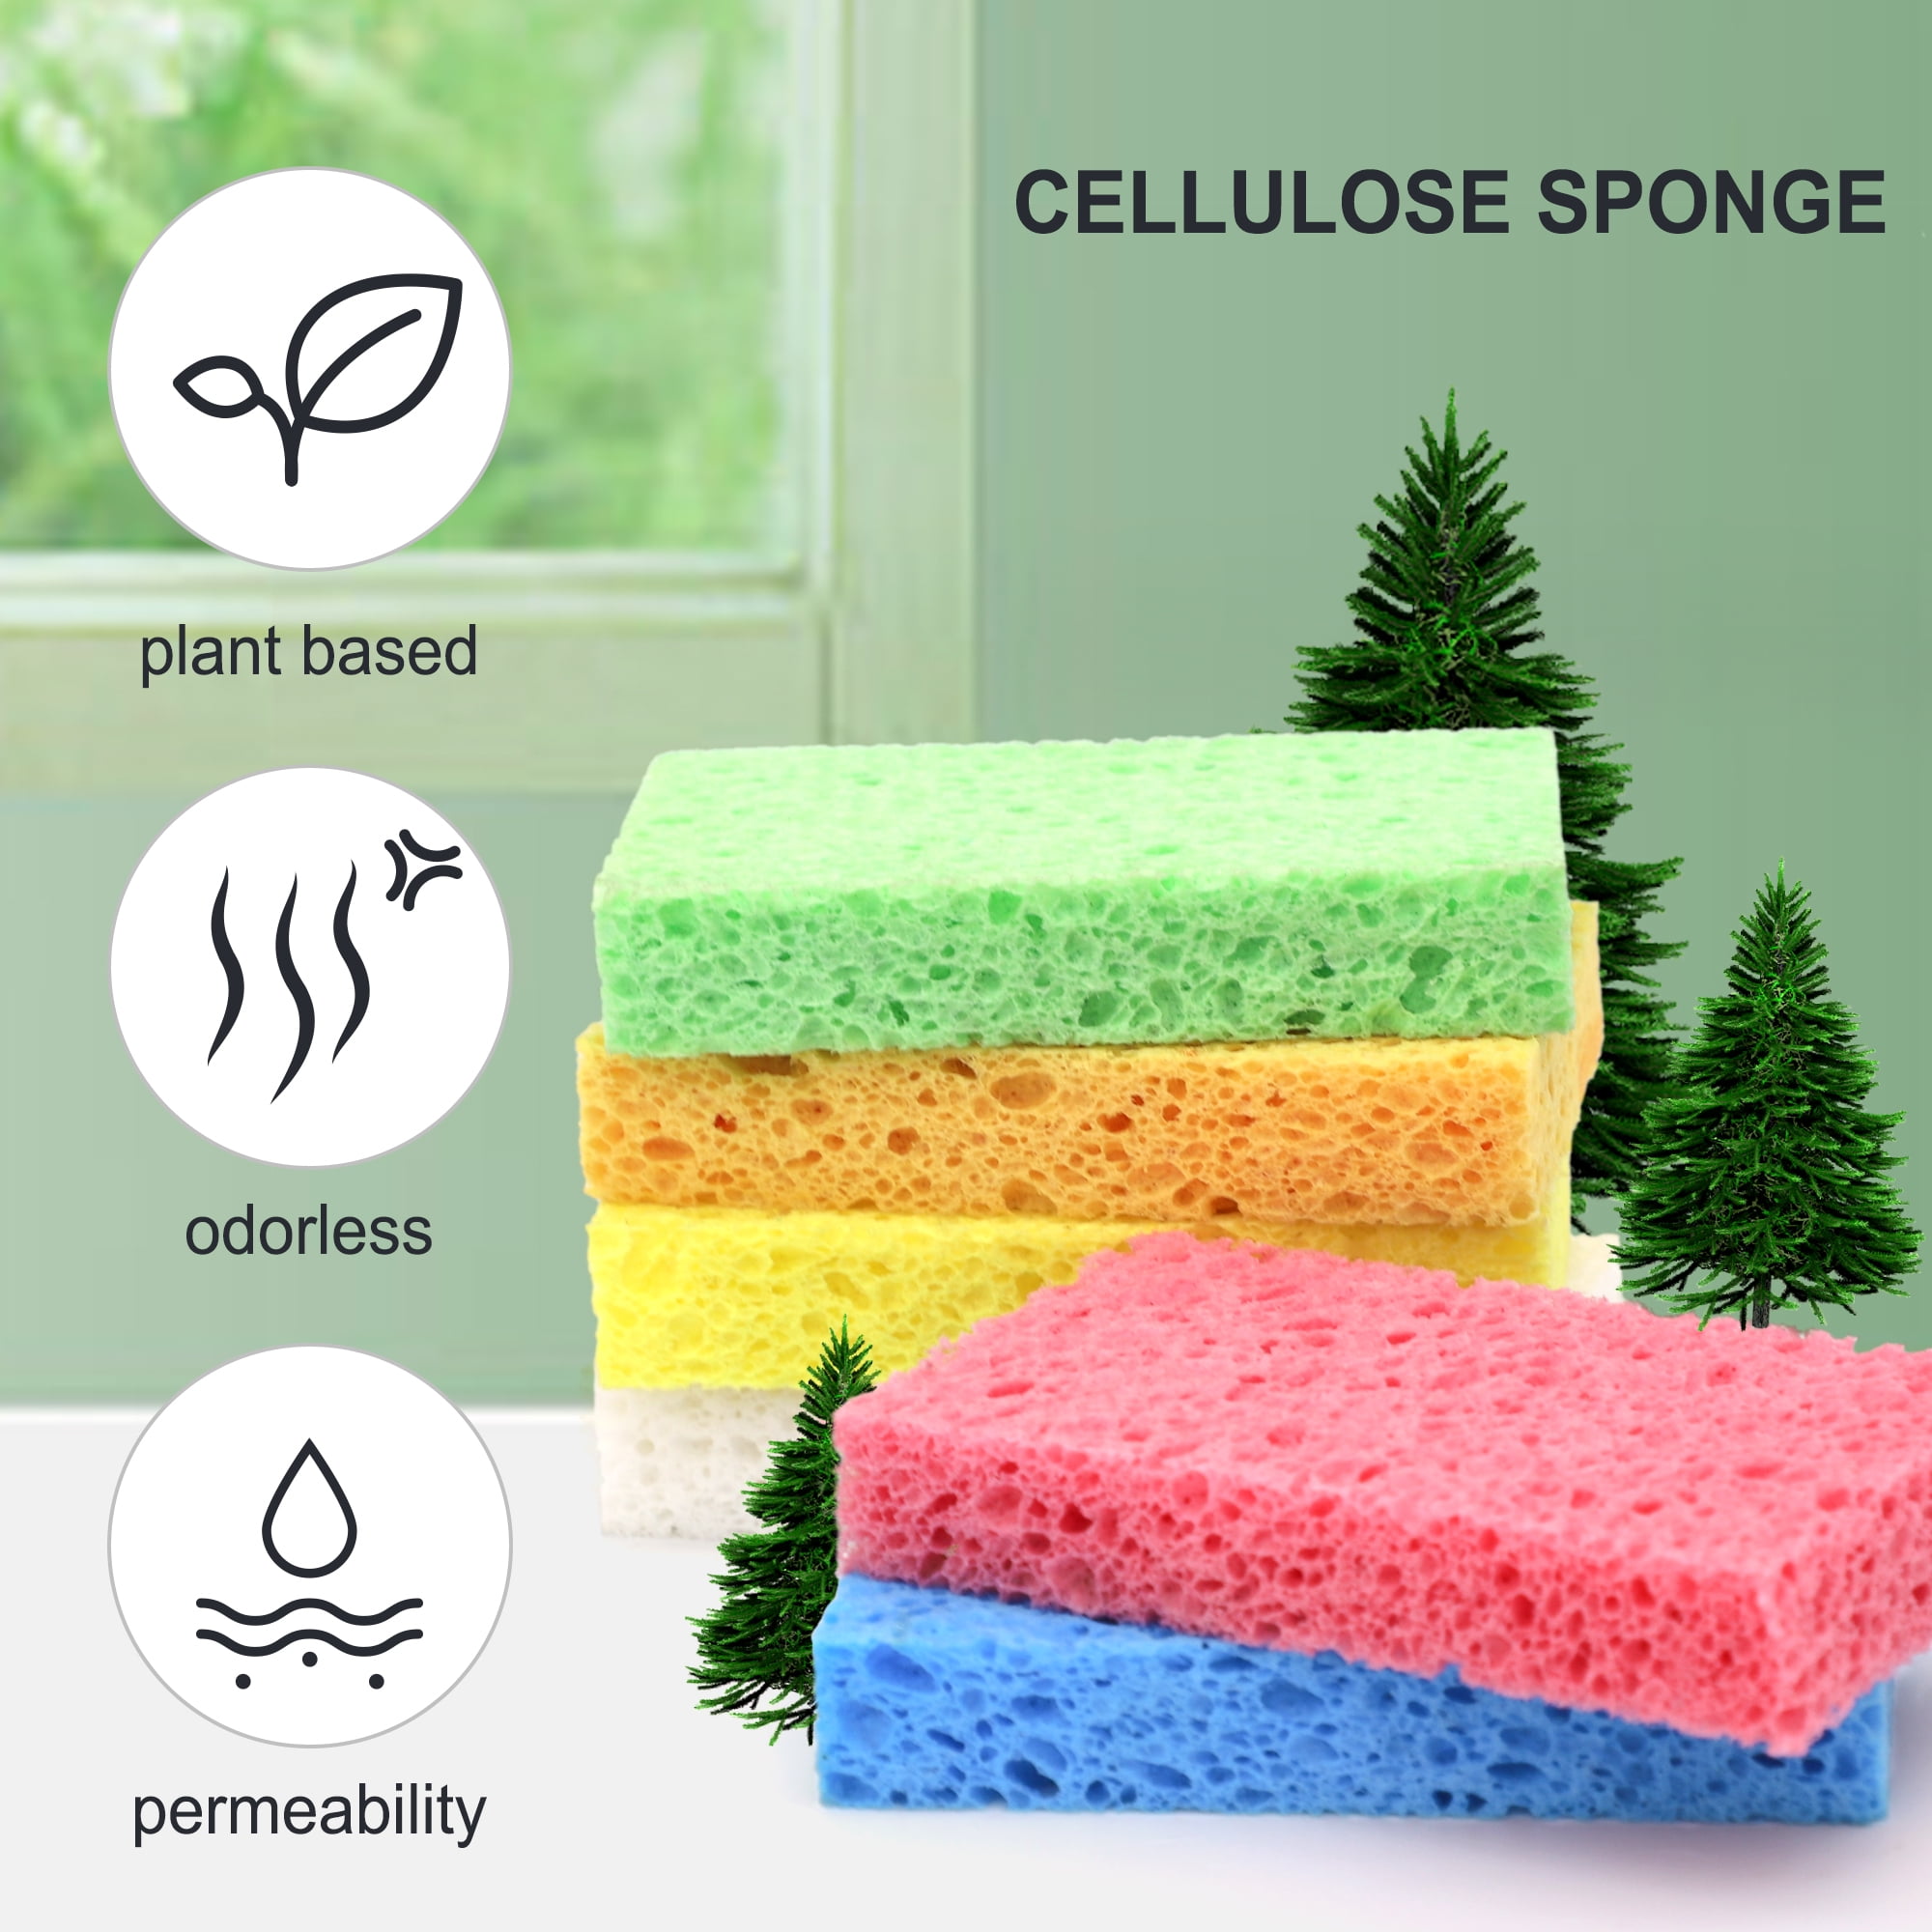 METUUTER 12-Count Kitchen Sponges- Compressed Cellulose Sponges Non-Scratch Natural Dish Sponge for Kitchen Bathroom Cars, Funny Cut-Outs DIY for Kids